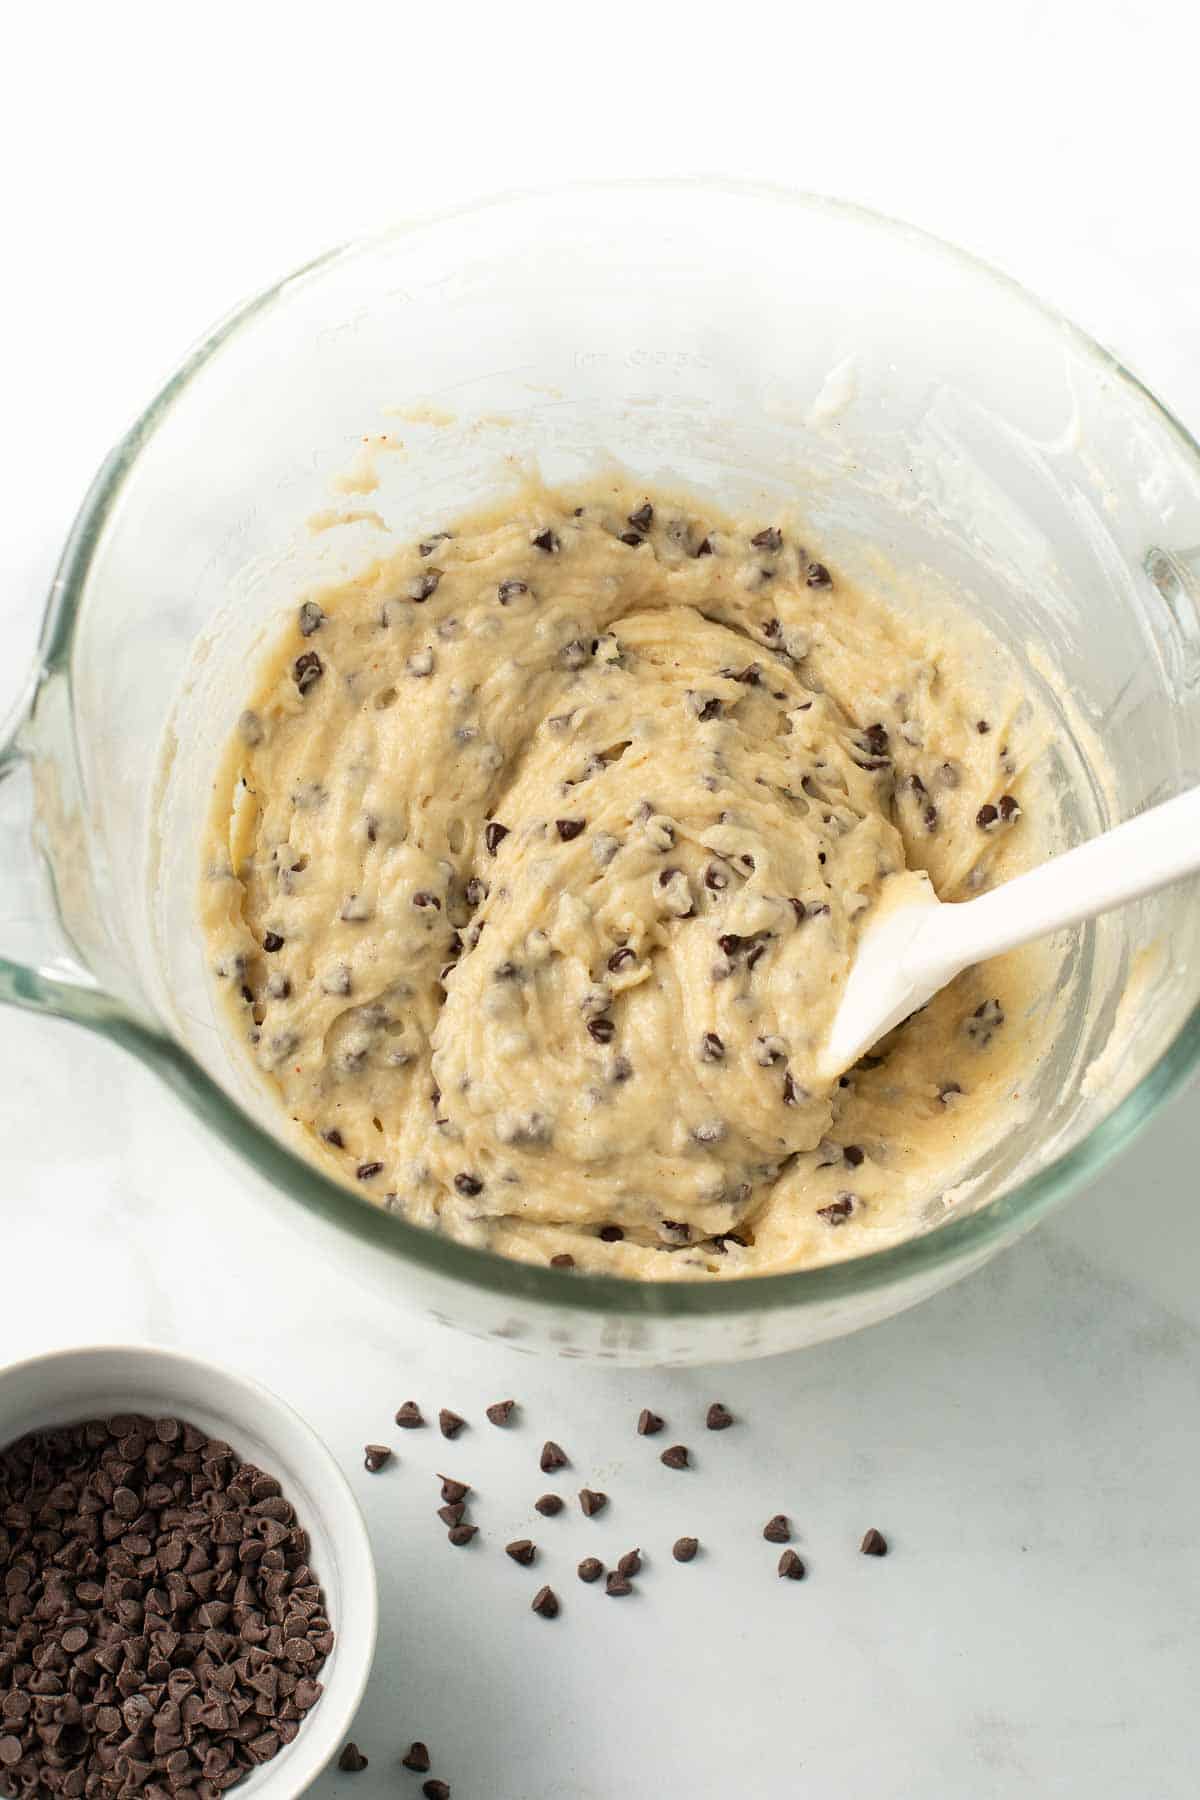 Chocolate chip muffin batter in a mixing bowl with a spatula